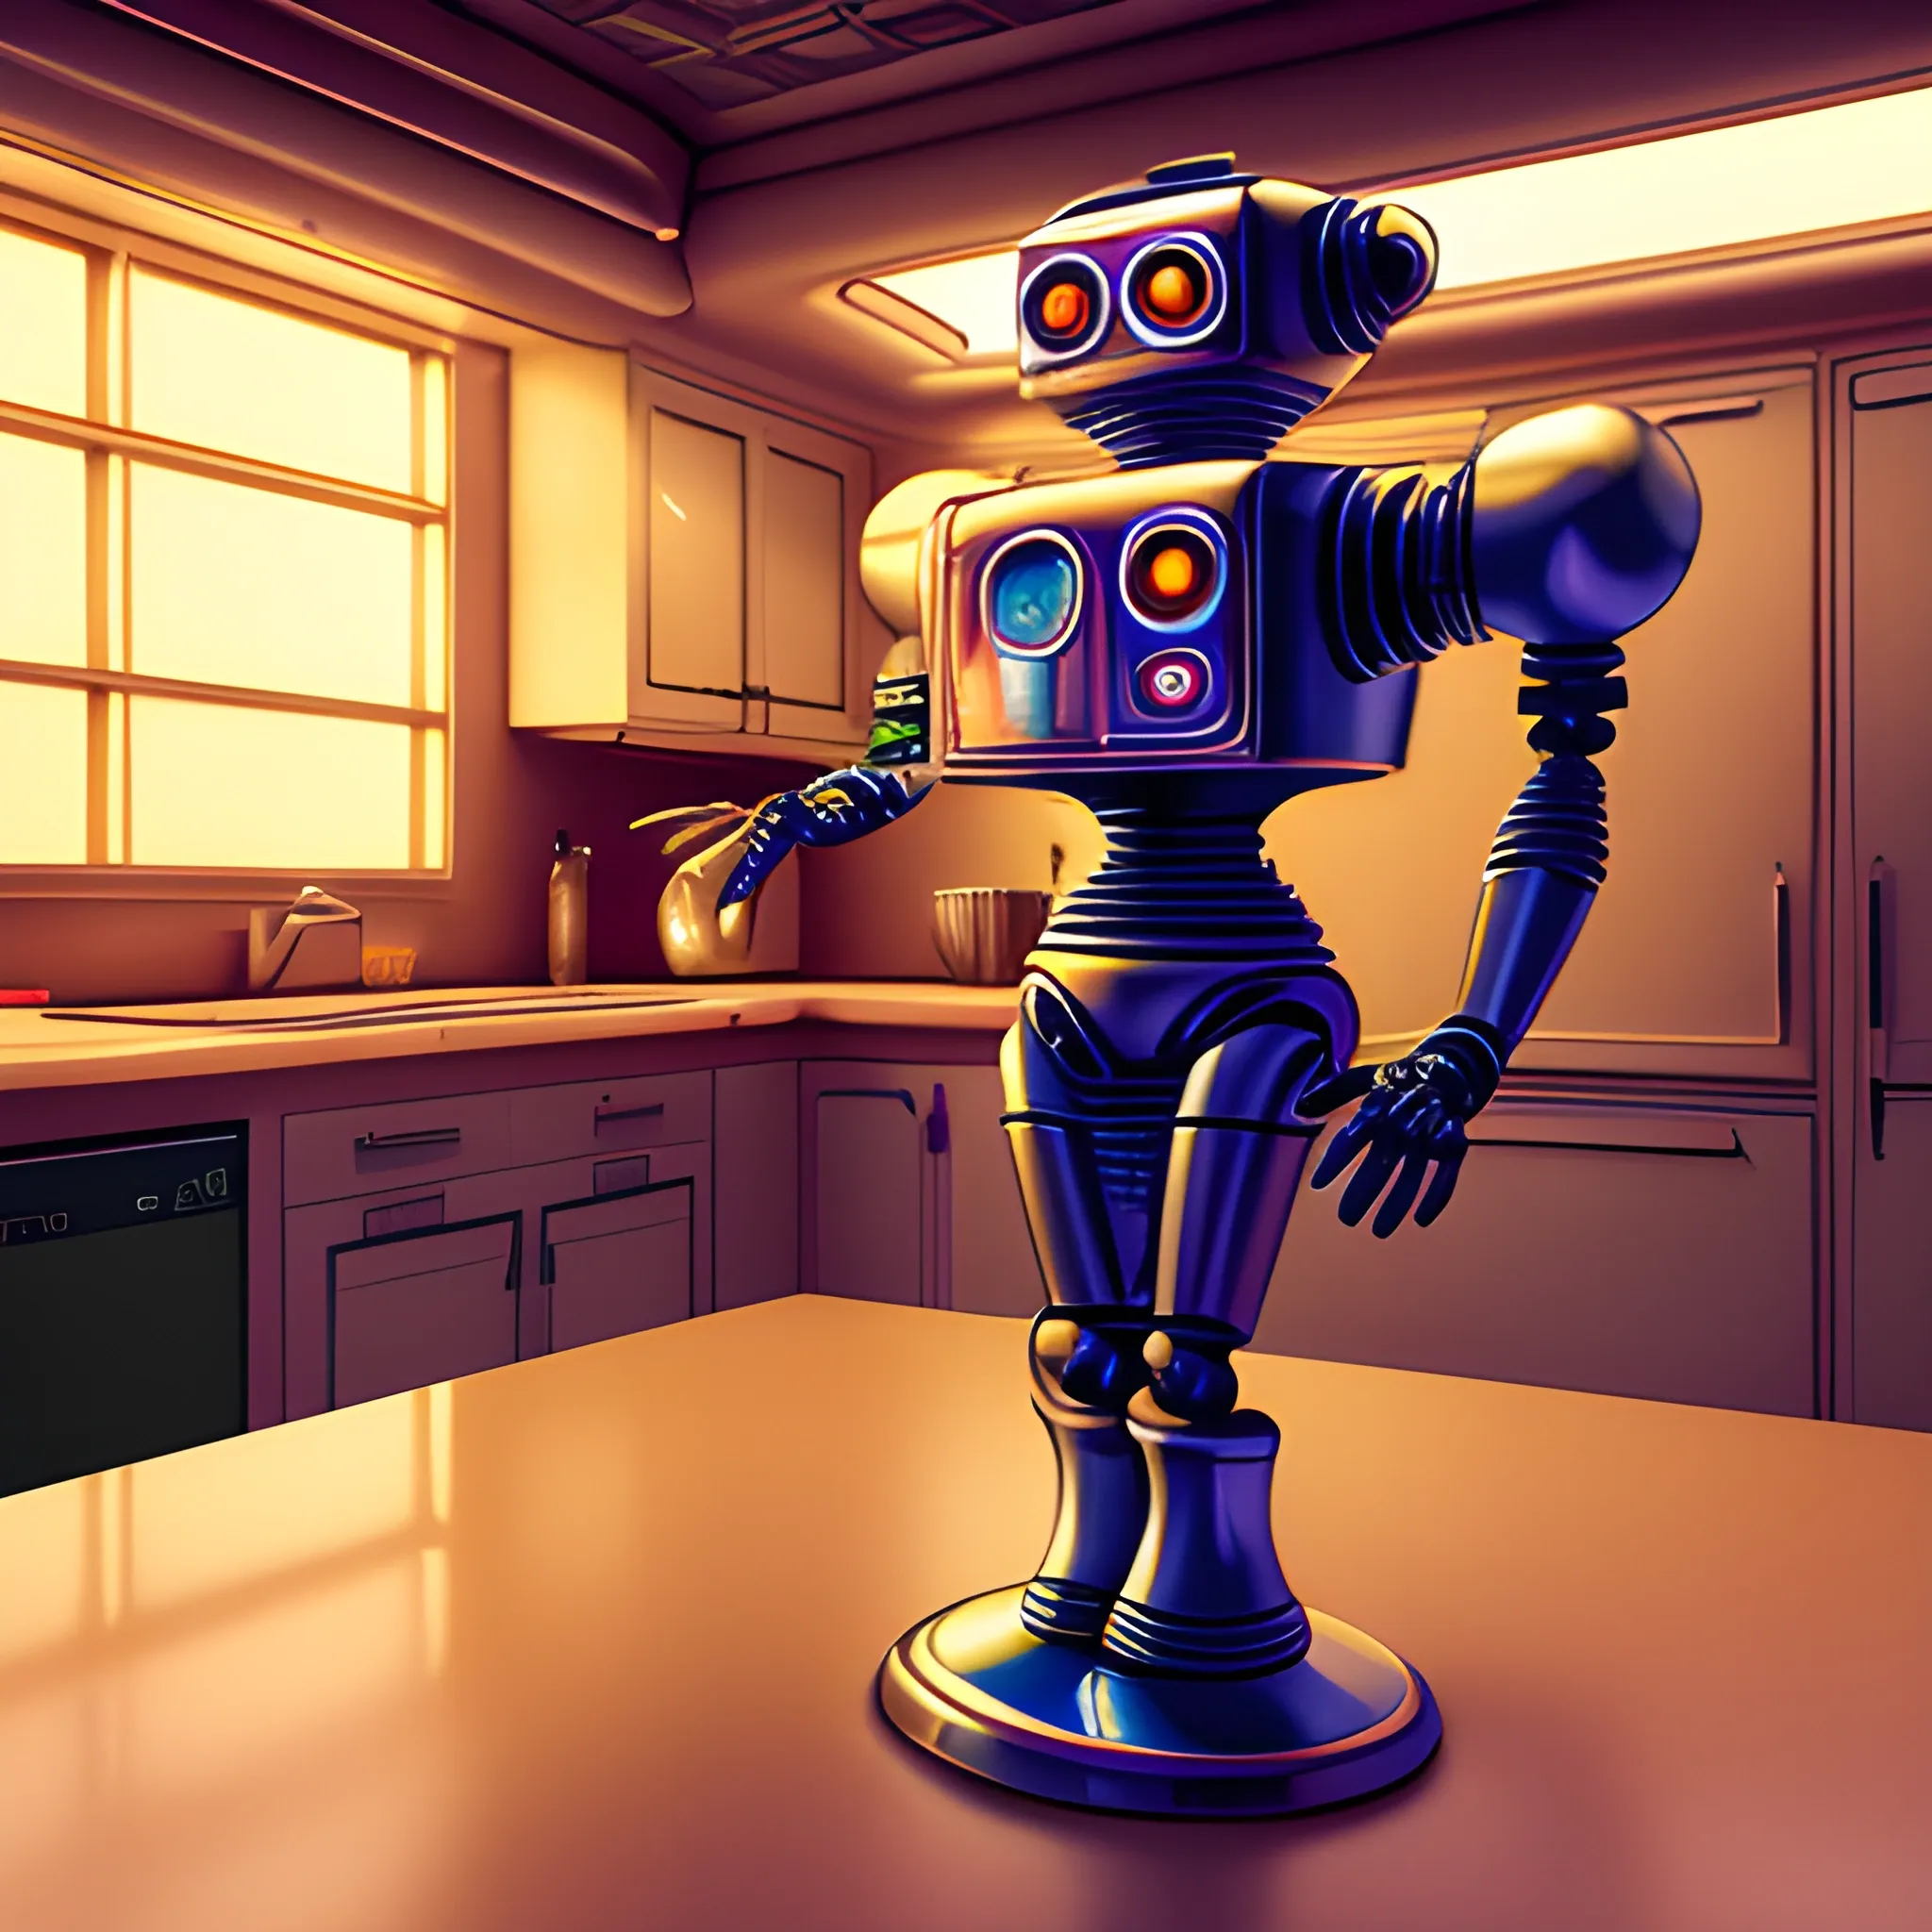 Kitchen, fancy dinner, retro futuristic, highly detailed, realistic, 4k, robot maid